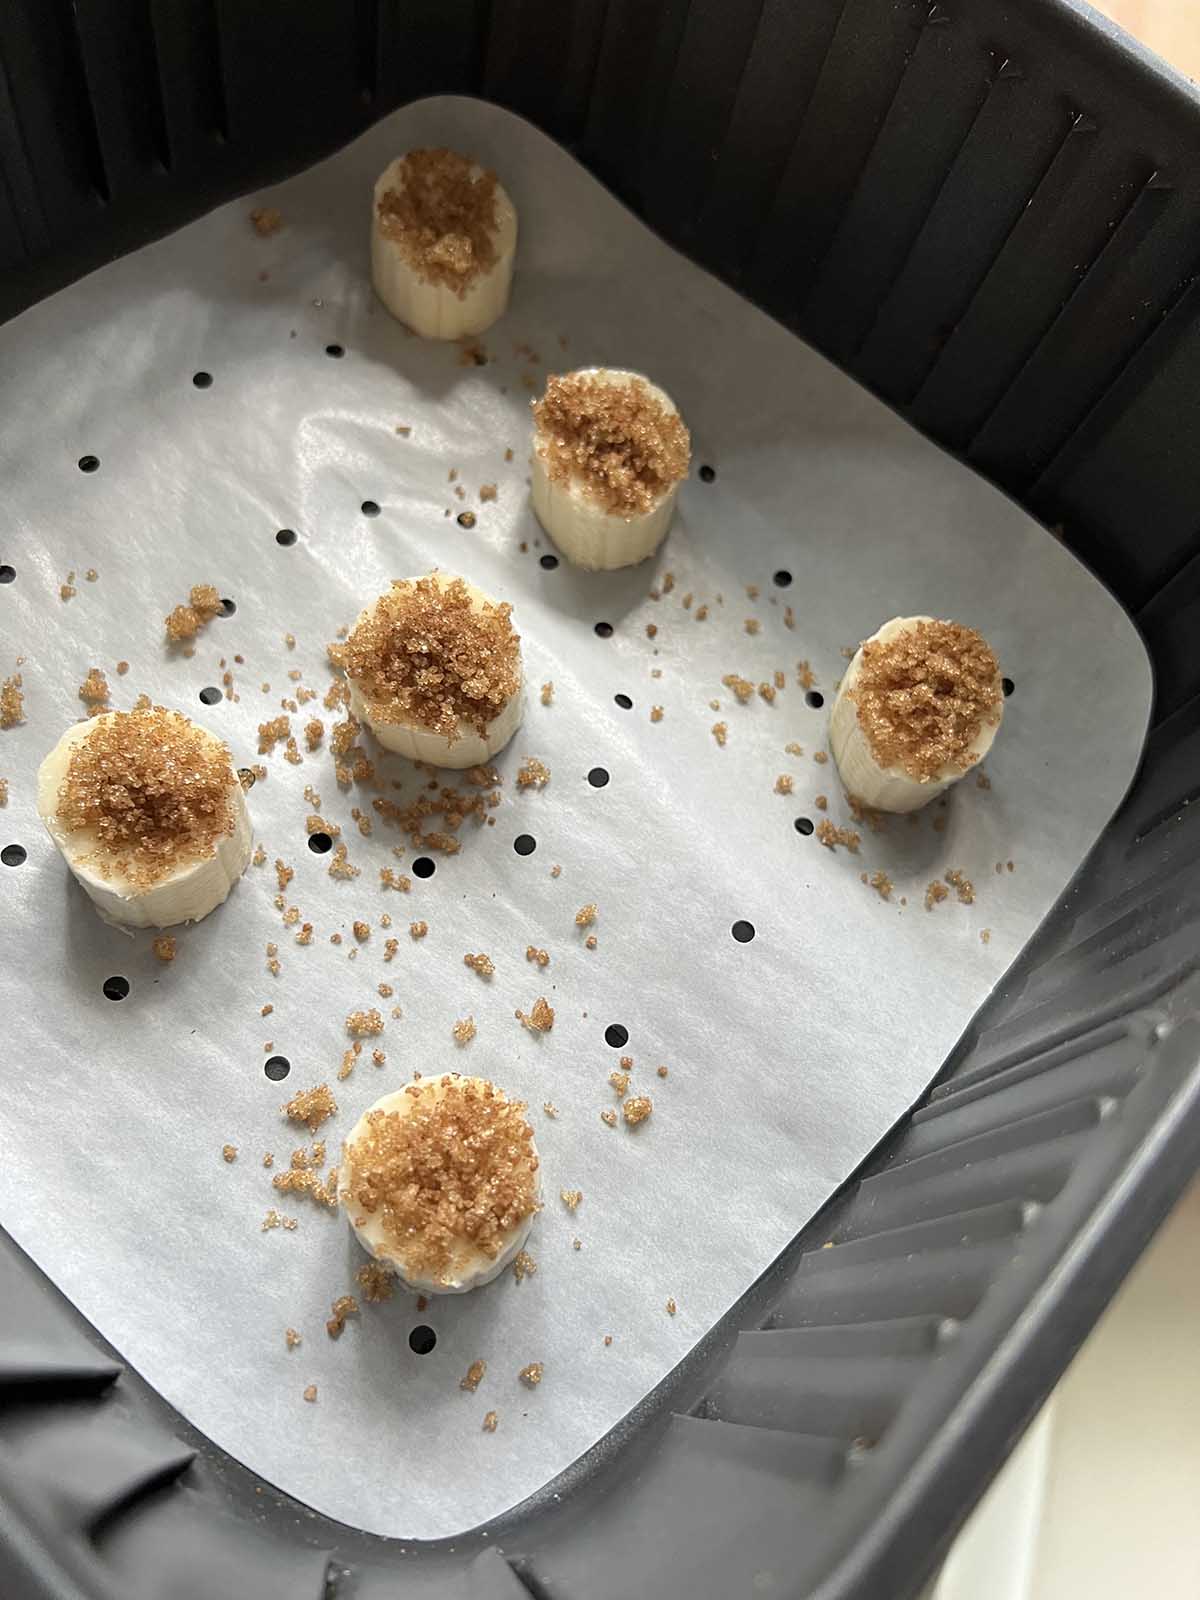 Banana slices with brown sugar on top in the air fryer basket